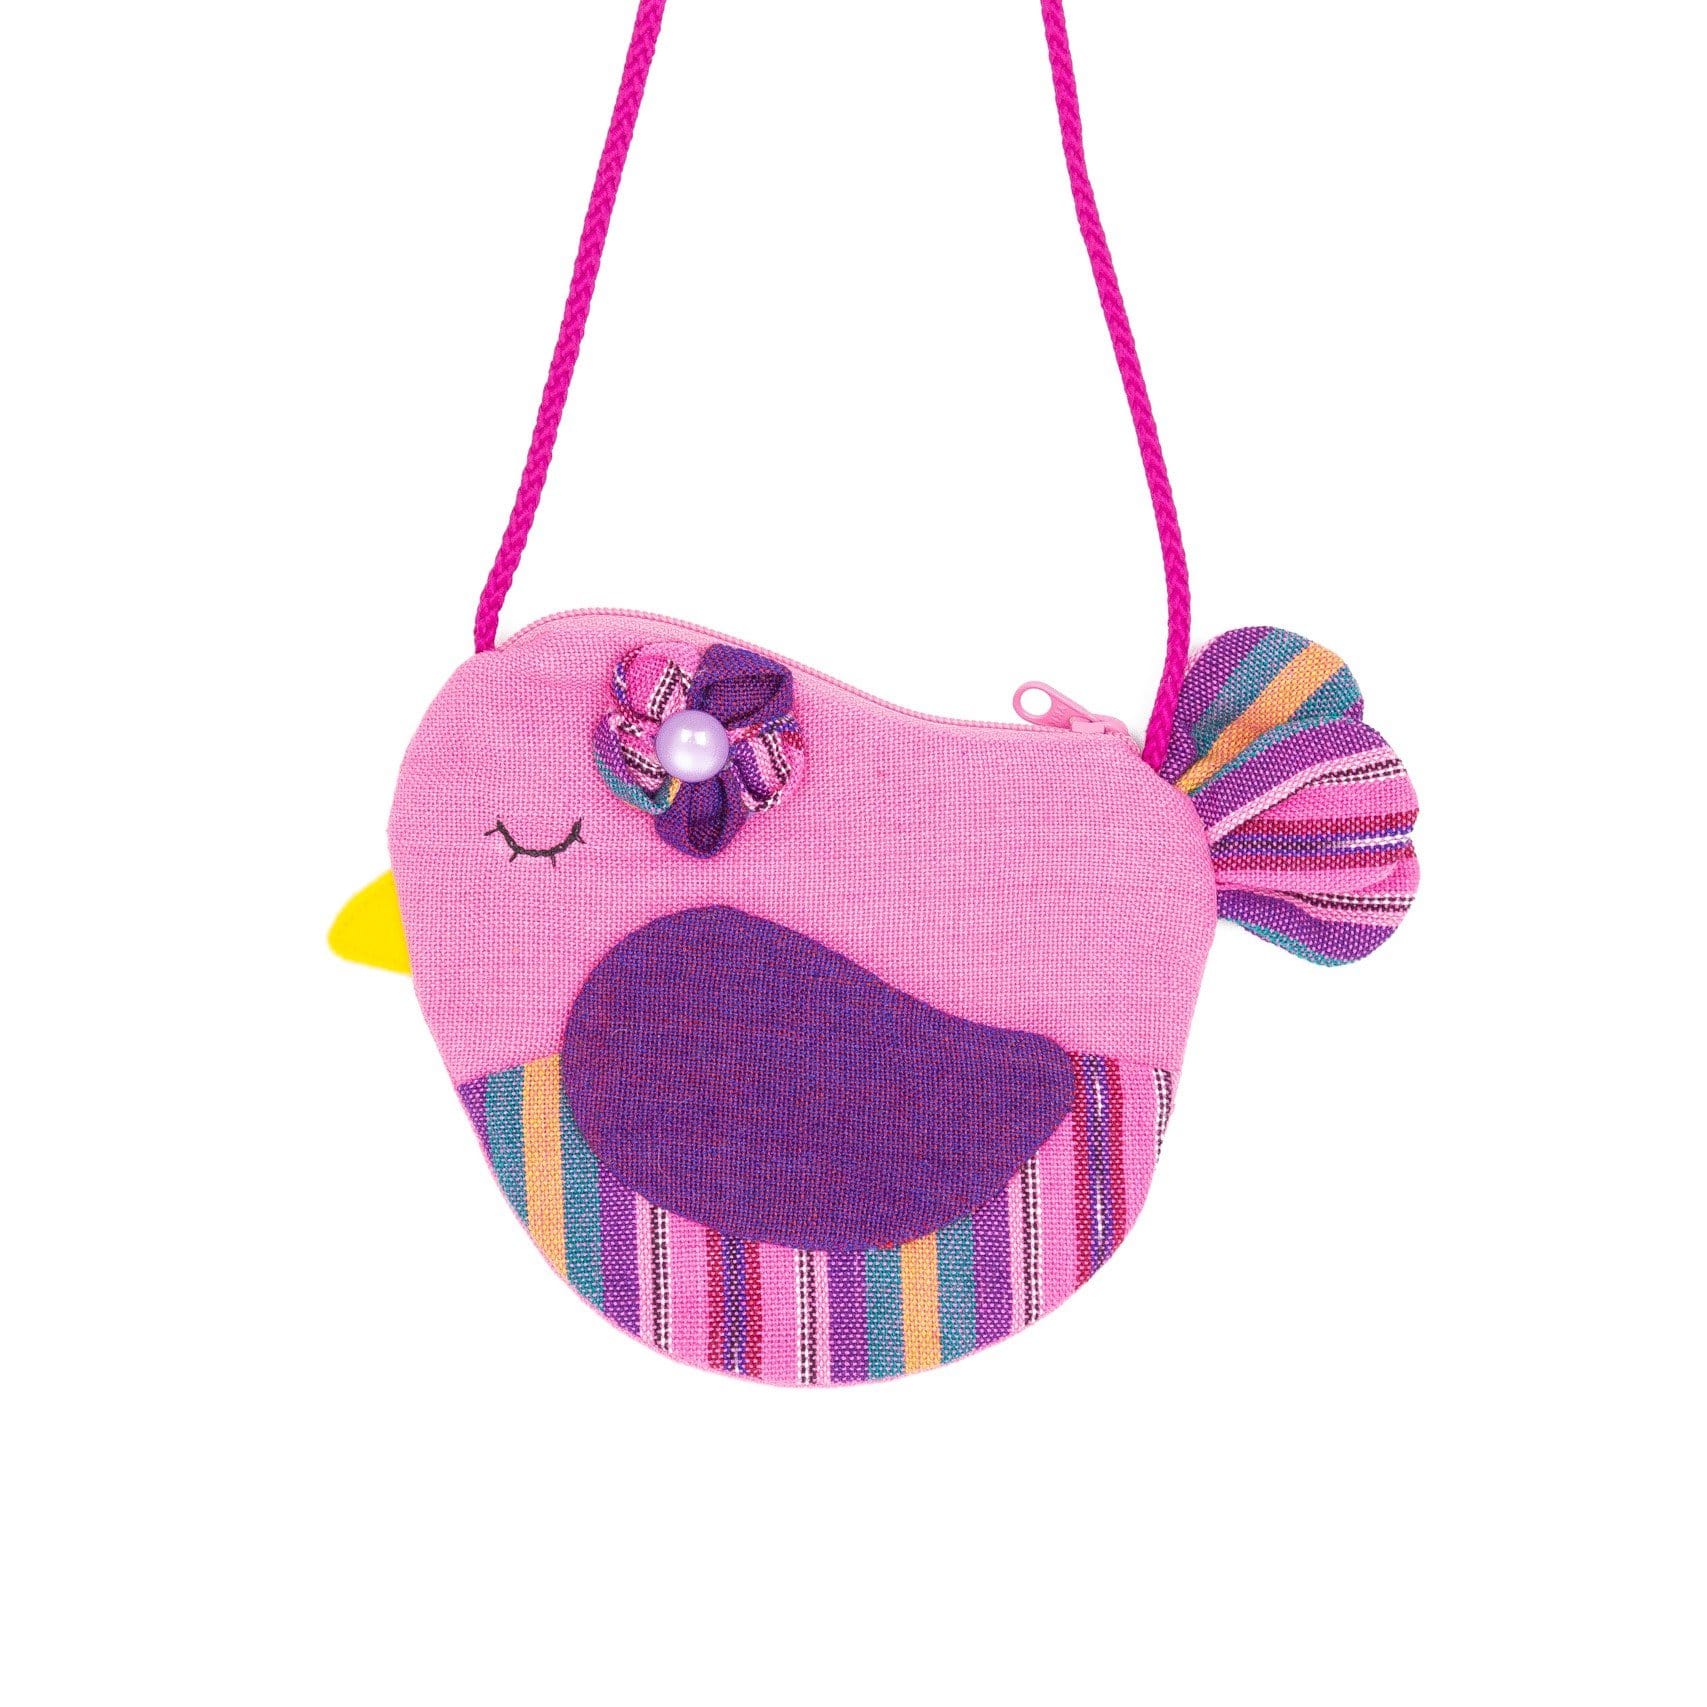 How cute are these Little Birdie Purses? Accented with a small flower and featuring a zippered top, this purse is perfect for keeping the little one's riches intact!